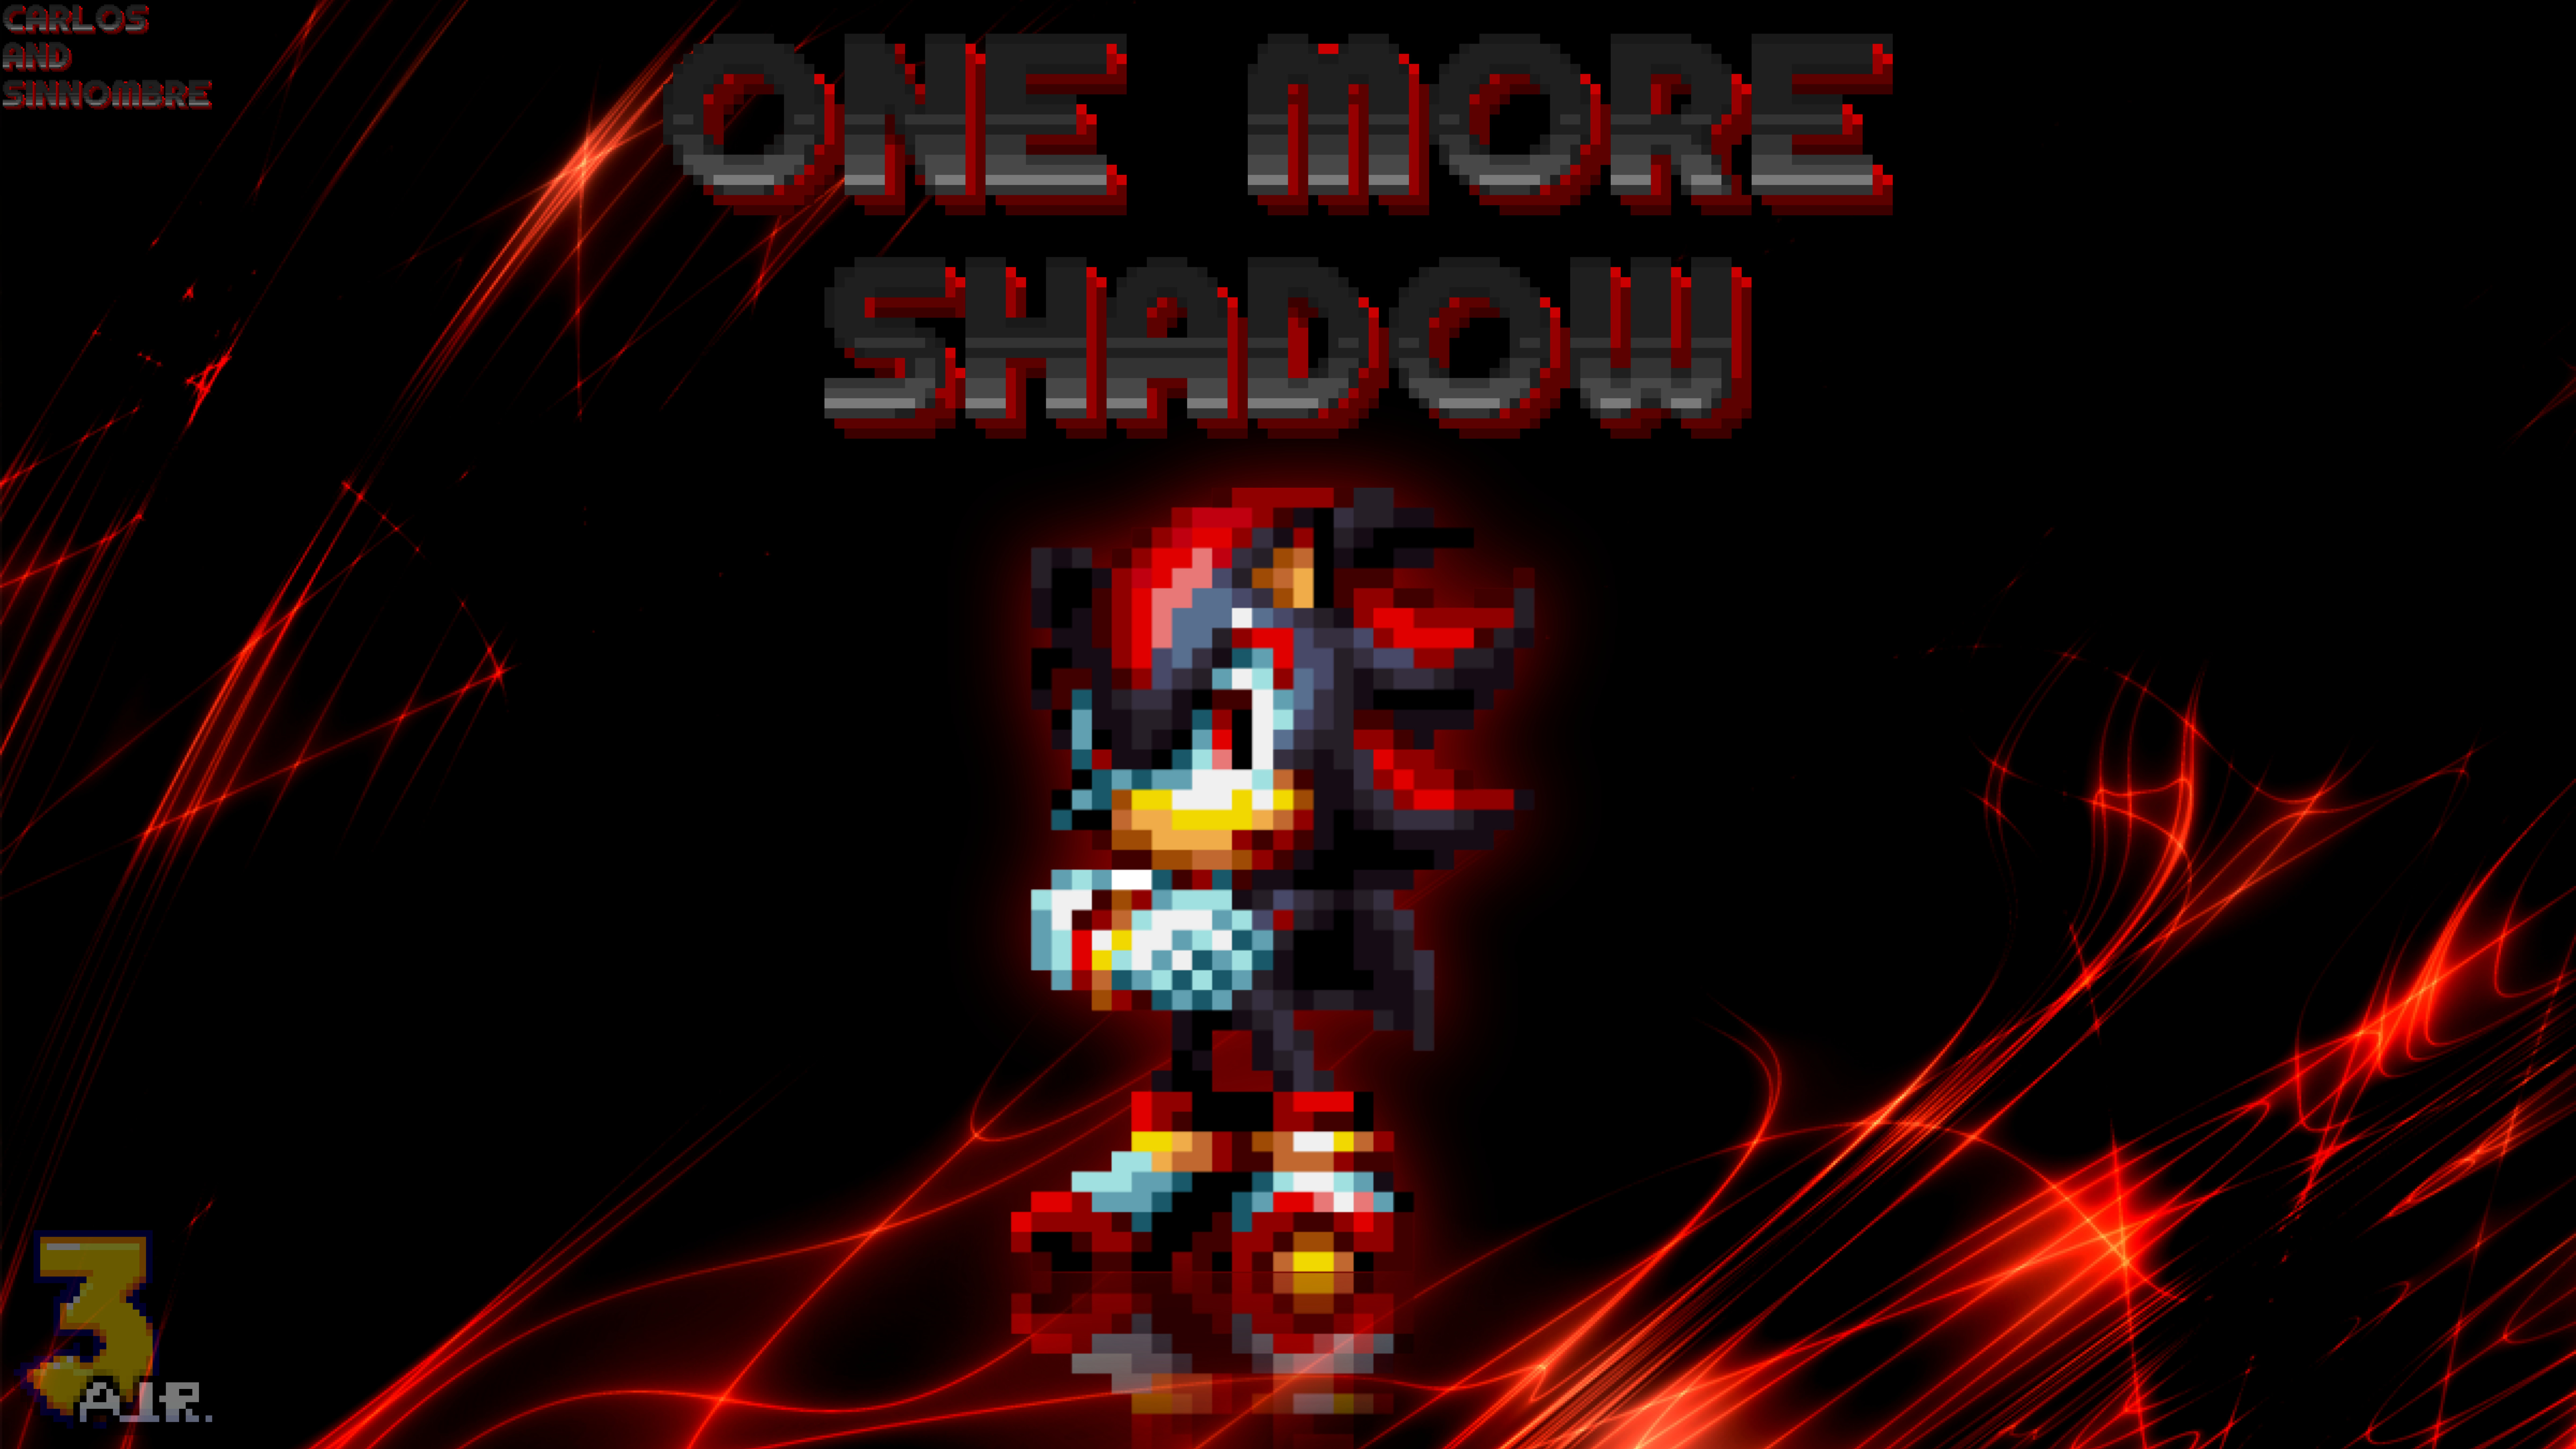 One more Shadow in Sonic 3 [Sonic 3 A.I.R.] [Works In Progress]